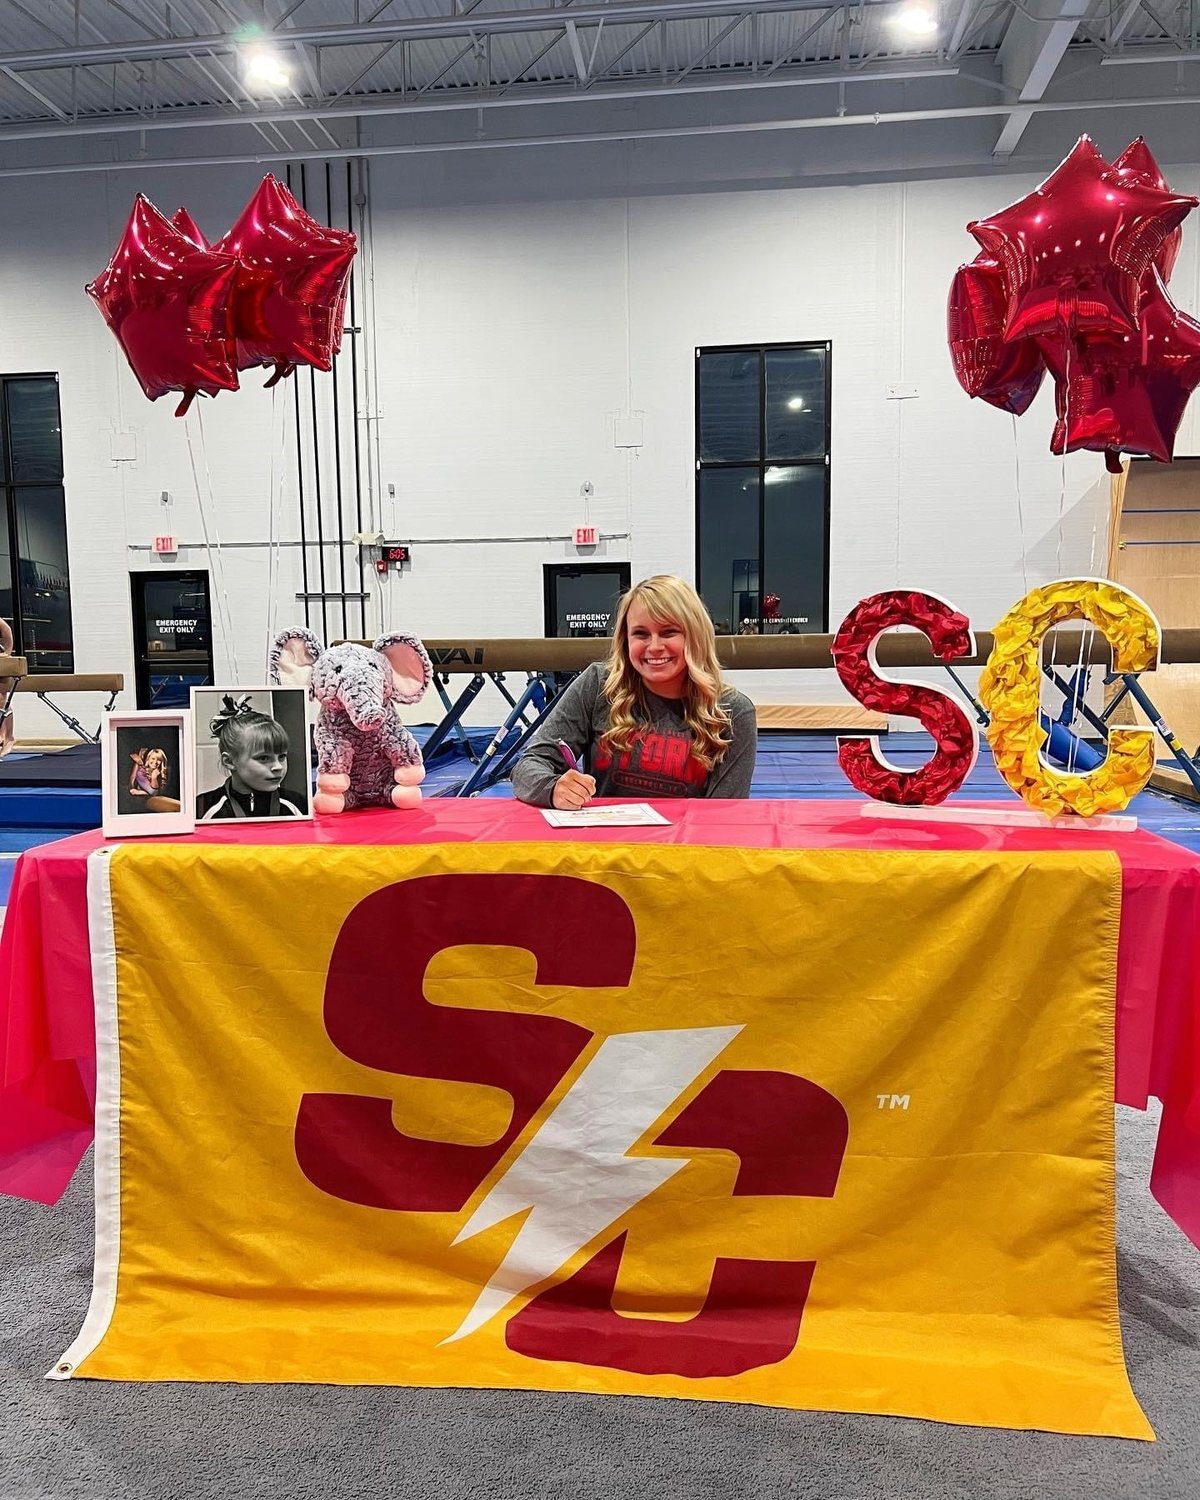 Crawfordsville senior Abbie Lain officially signed with Simpson college in Iowa to continue her gymnastics career while majoring in pre-dentistry. Abbie has won multiple state championships in her club career and has been to Nationals twice. She was named to the Premier Team last year for the National Gymnastics. Her freshman year at Crawfordsville, she broke all five school records on her way to qualifying for the Regional. Abbie 
currently competes for Fusion Gymnastics in Brownsburg and is coached by Heather Stevens.